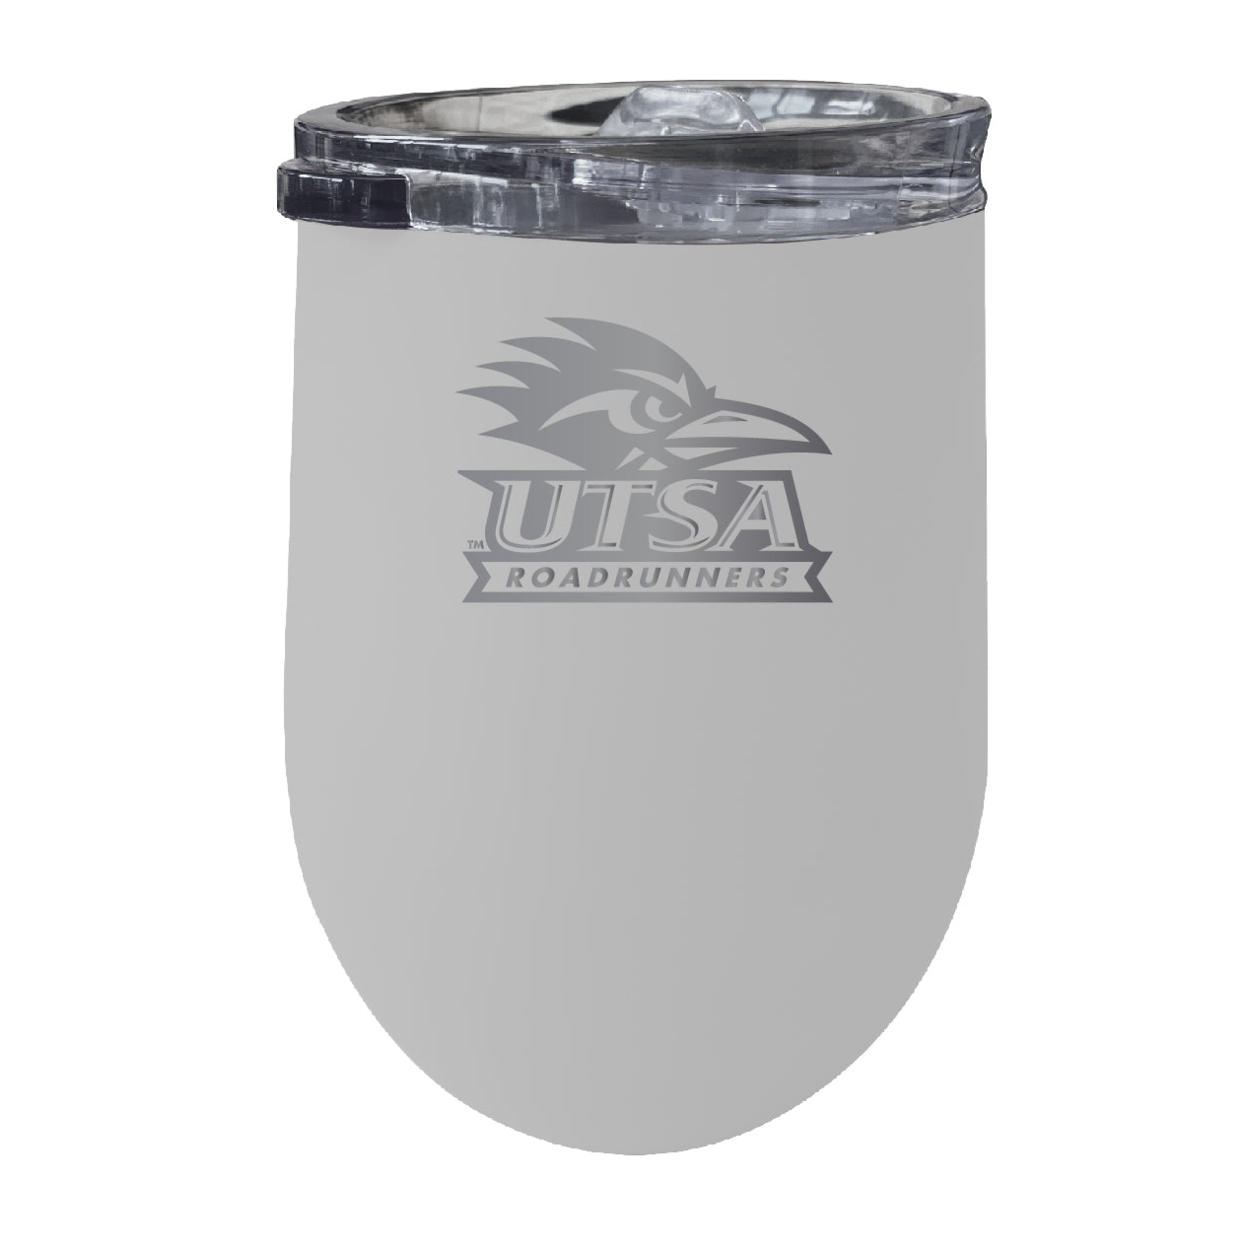 UTSA Road Runners 12 Oz Etched Insulated Wine Stainless Steel Tumbler - Choose Your Color - White